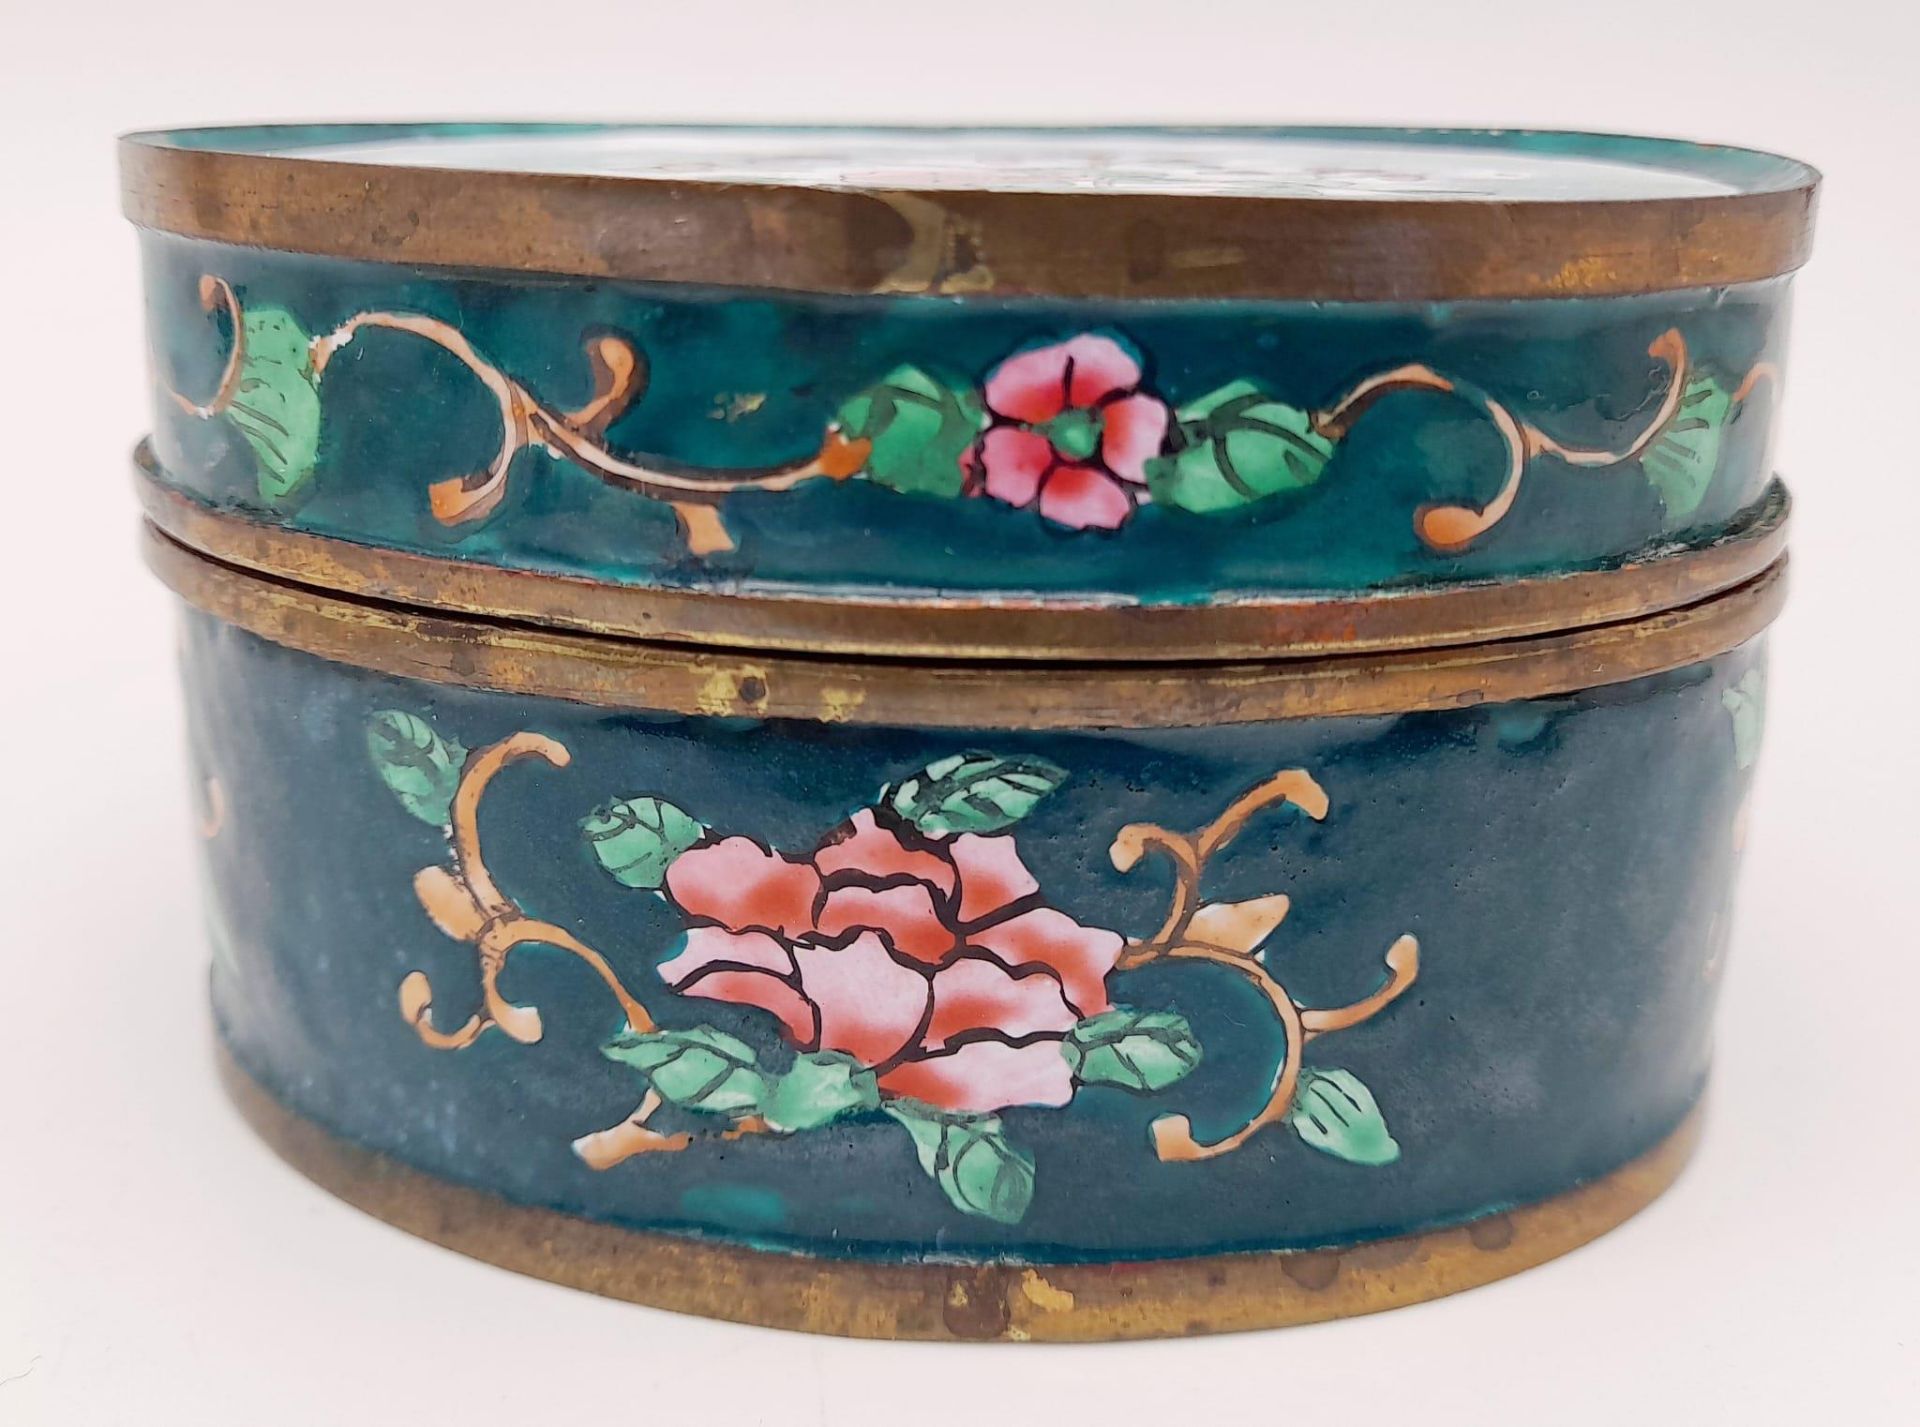 An Antique Chinese Canton Oval Enamel Box. Hand decorated, with wonderful enamels on copper. A - Image 7 of 7